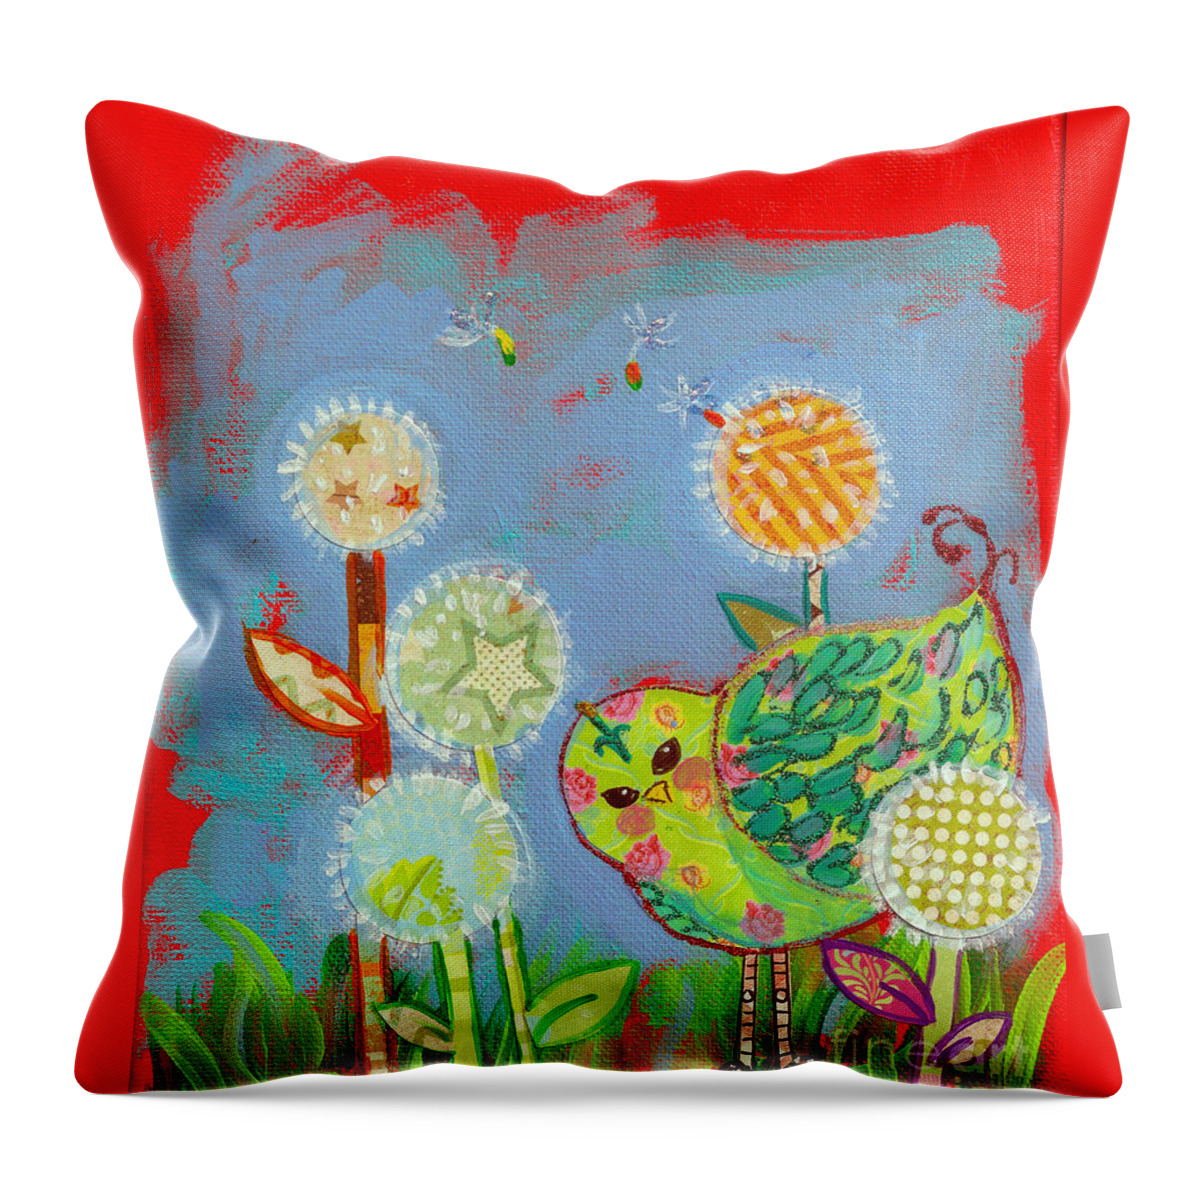 Bird Throw Pillow featuring the painting Wishful Thinking Birdy by Shelley Overton